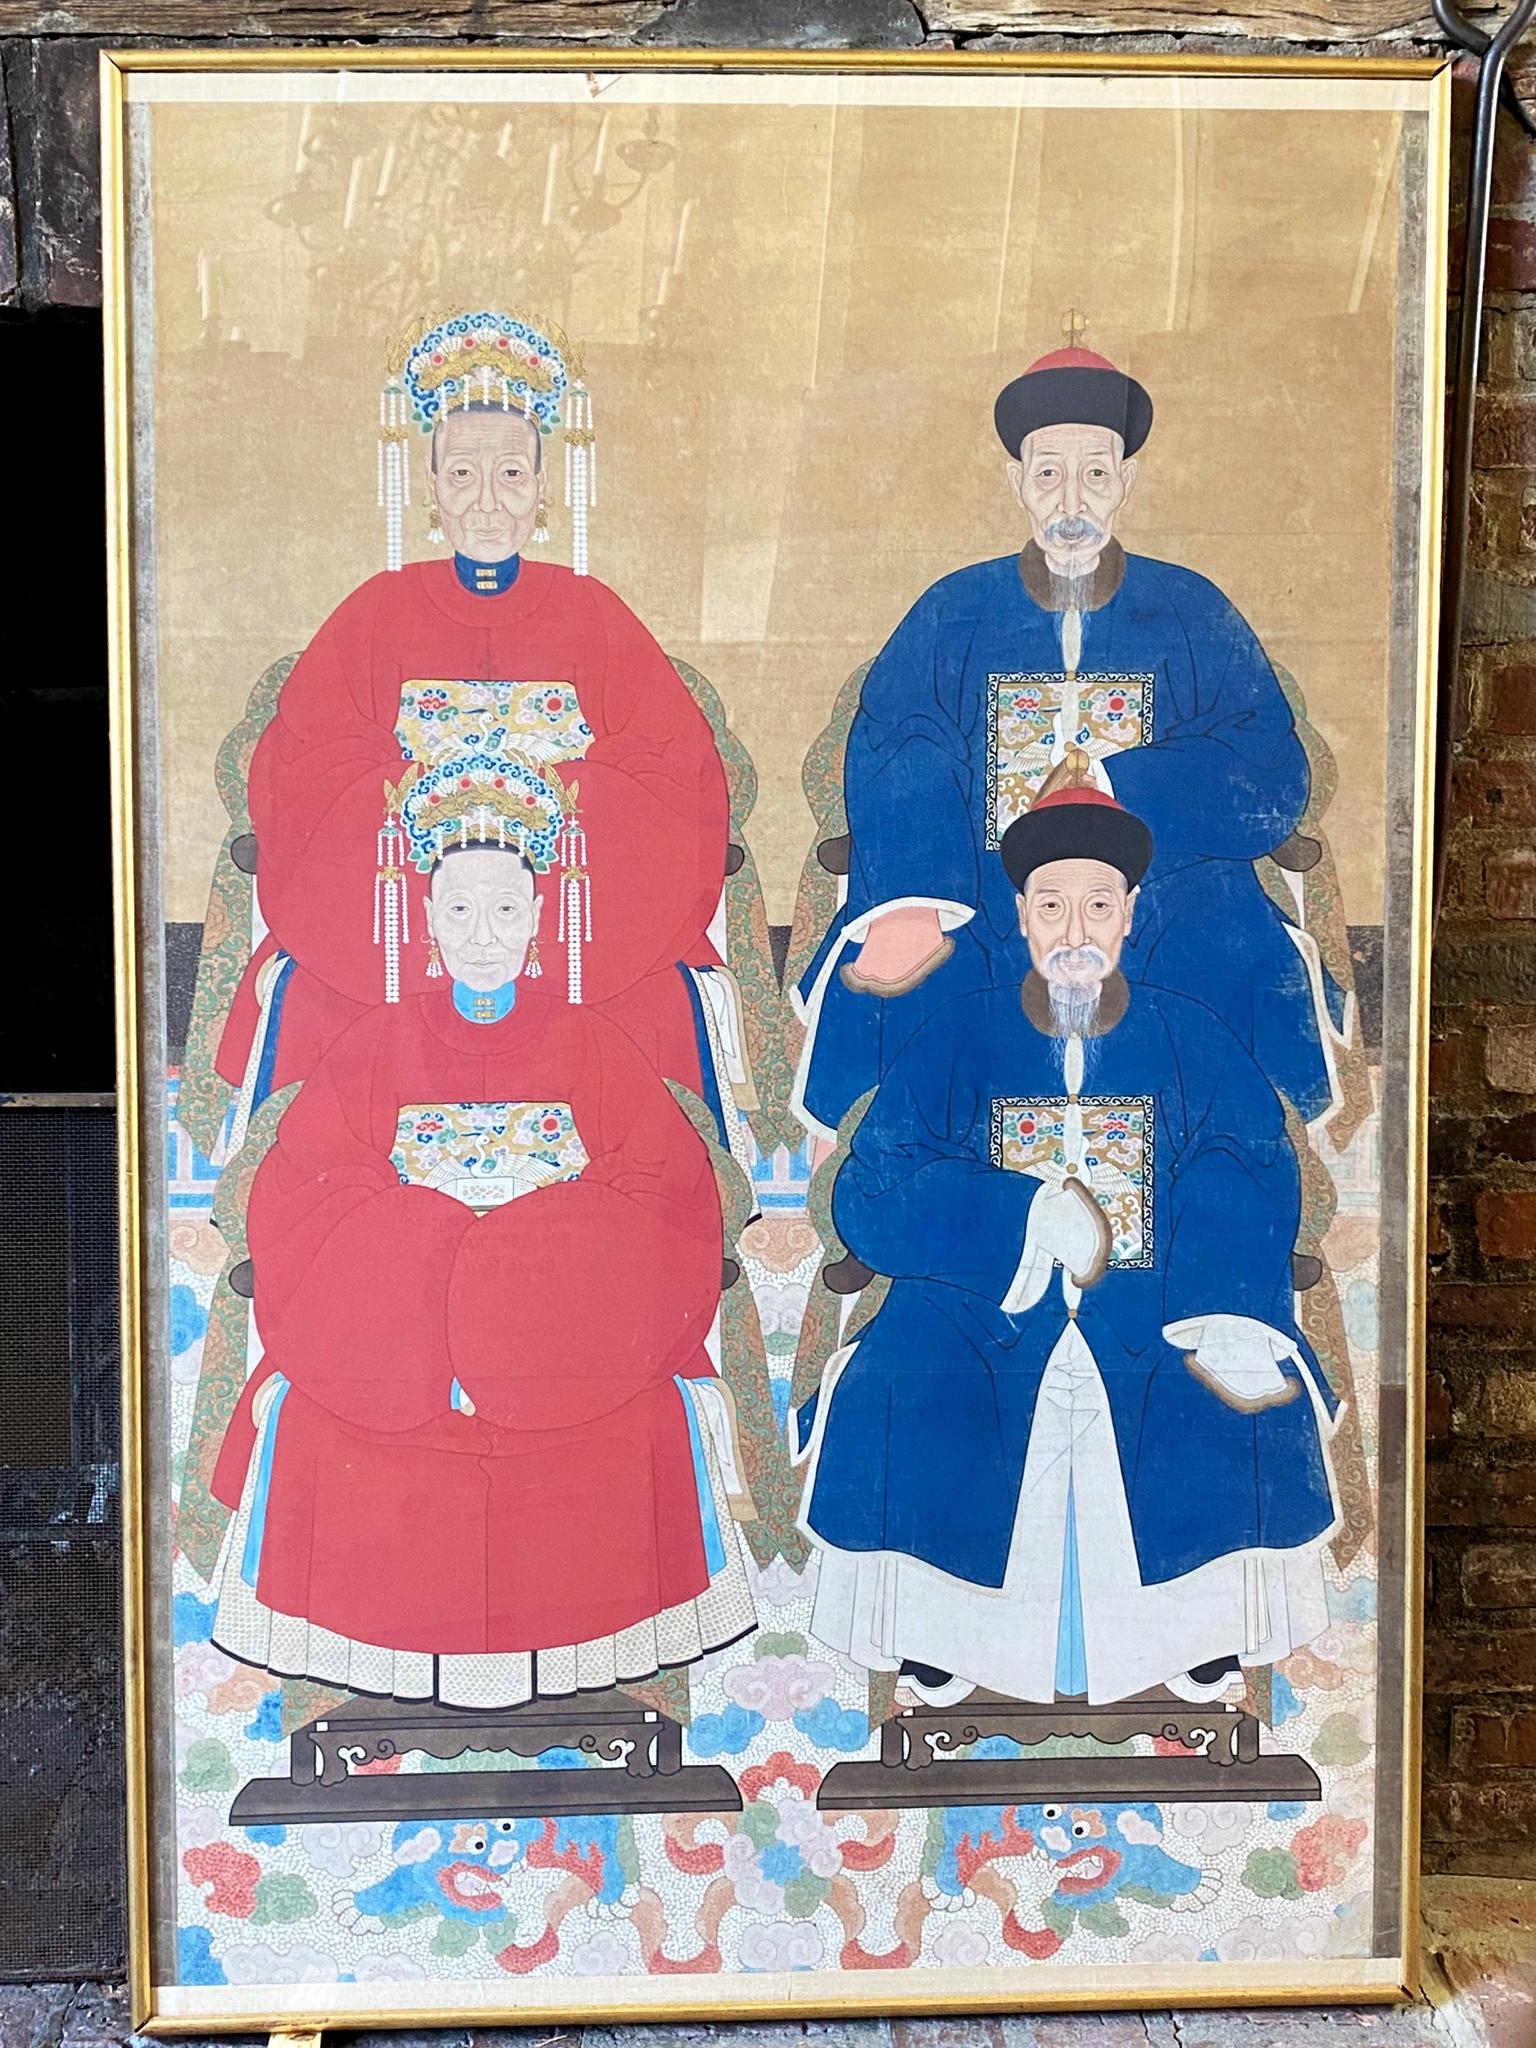 Painted in the 19th century during the Qing Dynasty era, this portrait honors 4 members of an esteemed Mandarin family. It is rendered beautifully in watercolors and gouaches on paper. Each seated figure is dressed in richly hued robes bearing